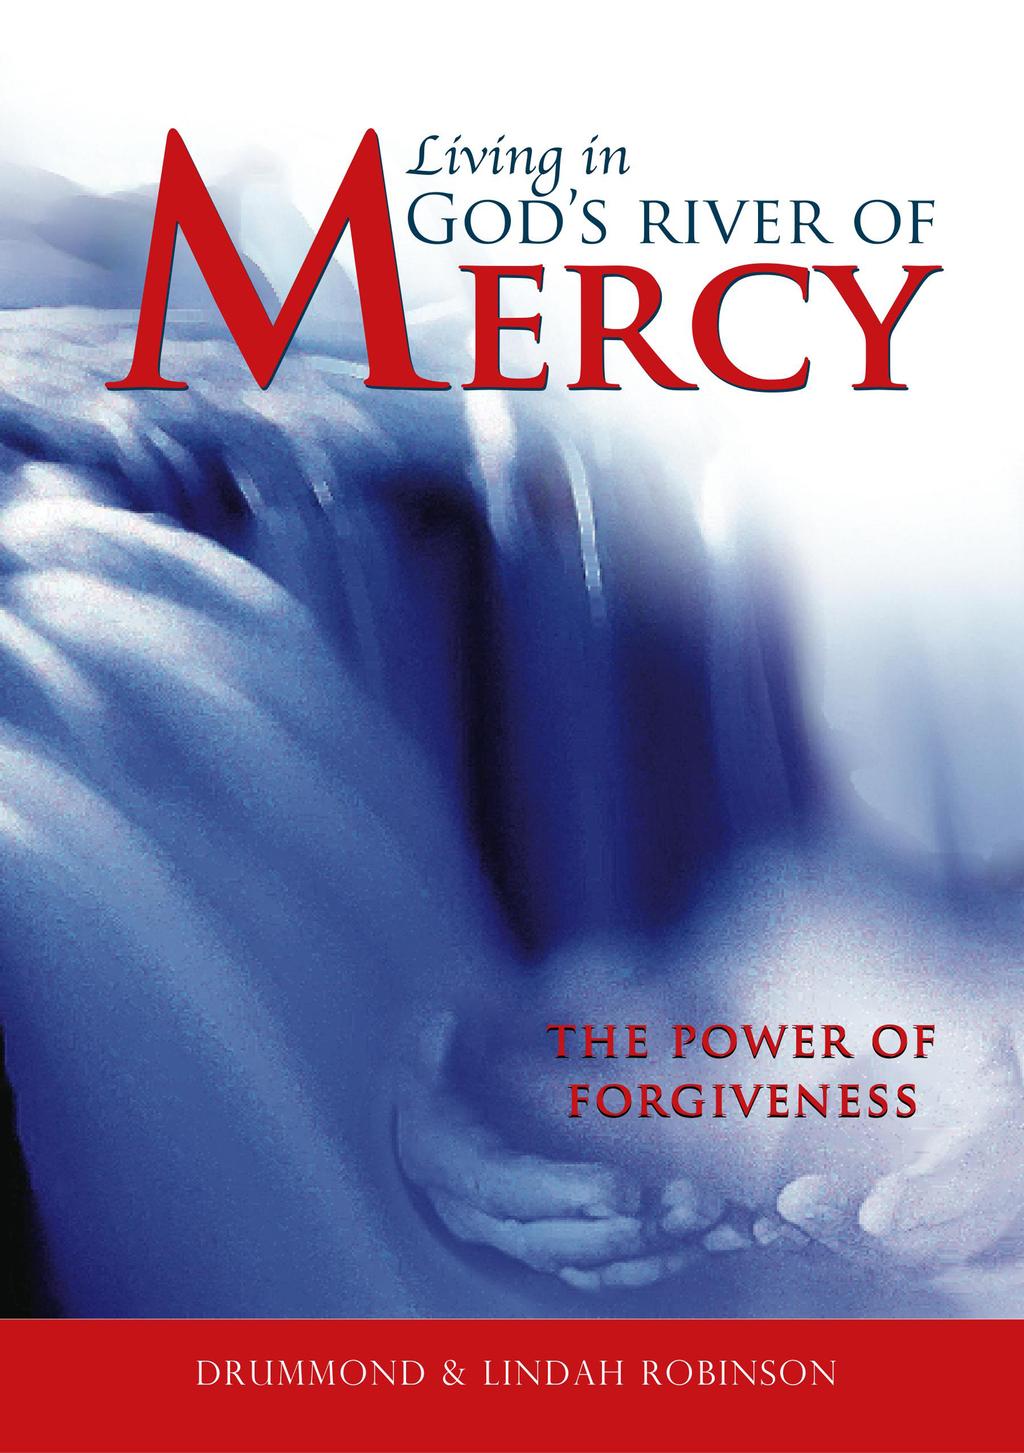 To be understanding of another s weaknesses, and to release grace and forgiveness towards them. Matthew 5:7 Blessed are the merciful, they will receive mercy.